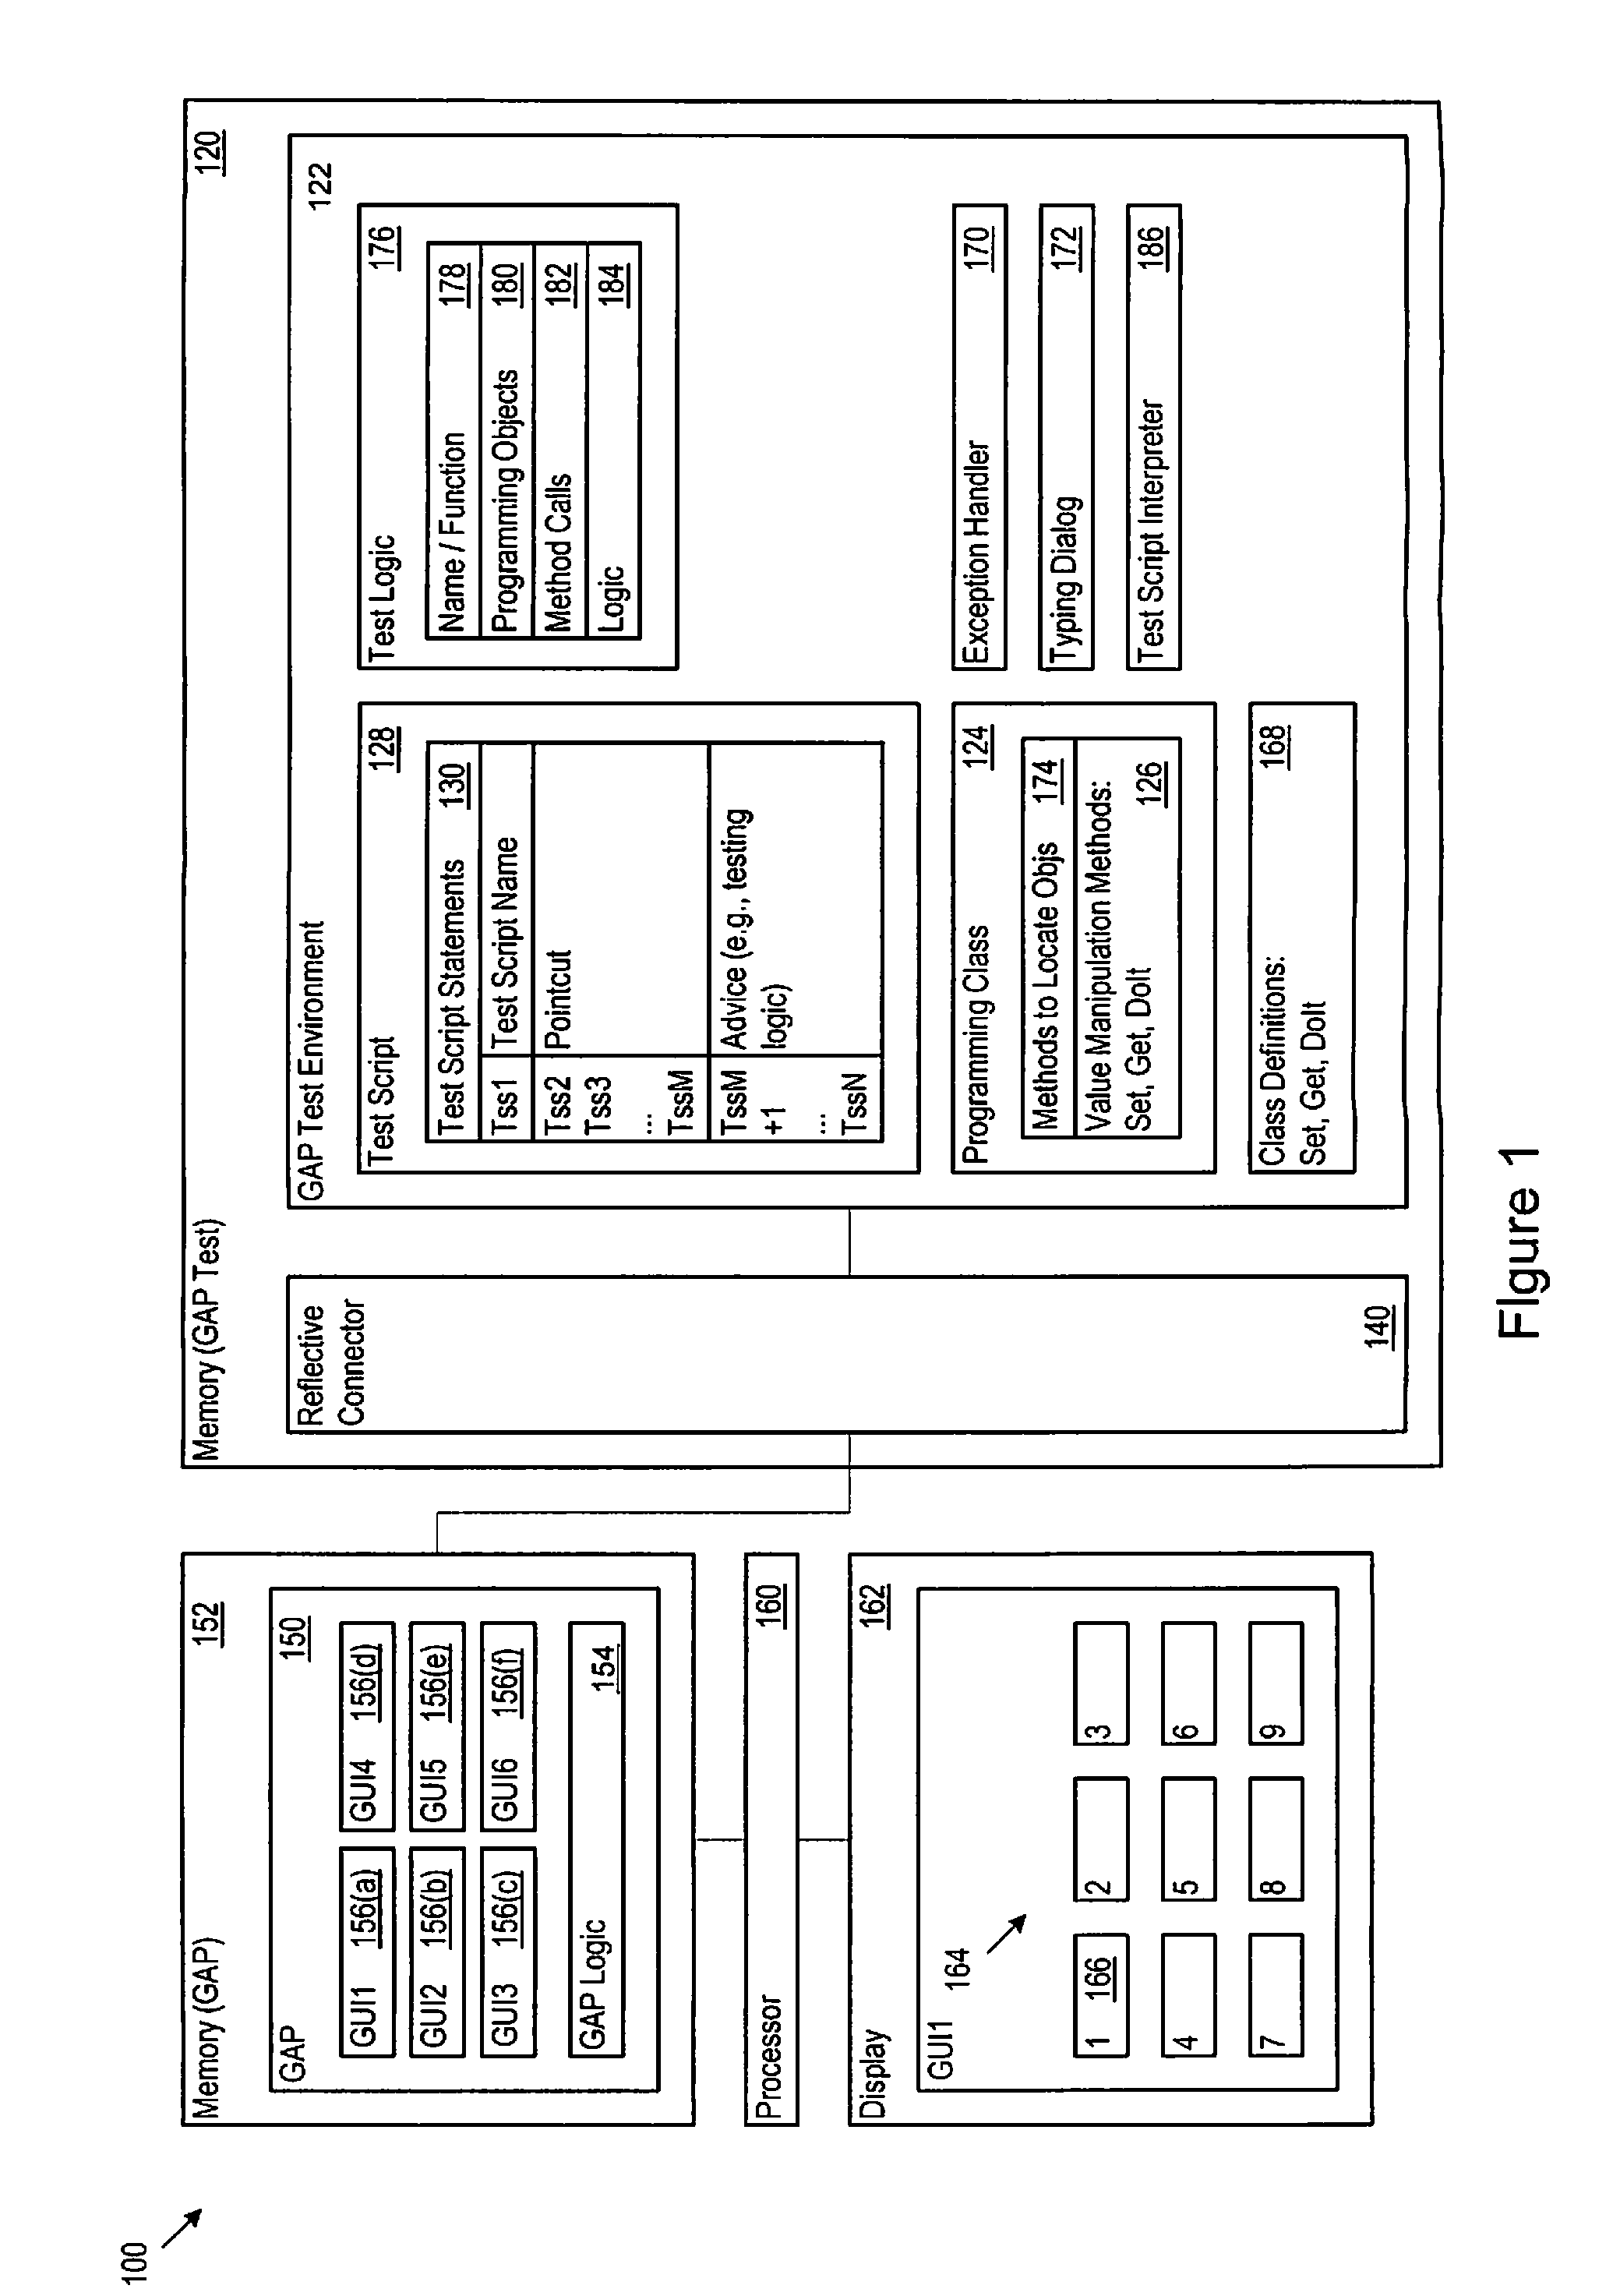 Modularizing and aspectizing graphical user interface directed test scripts